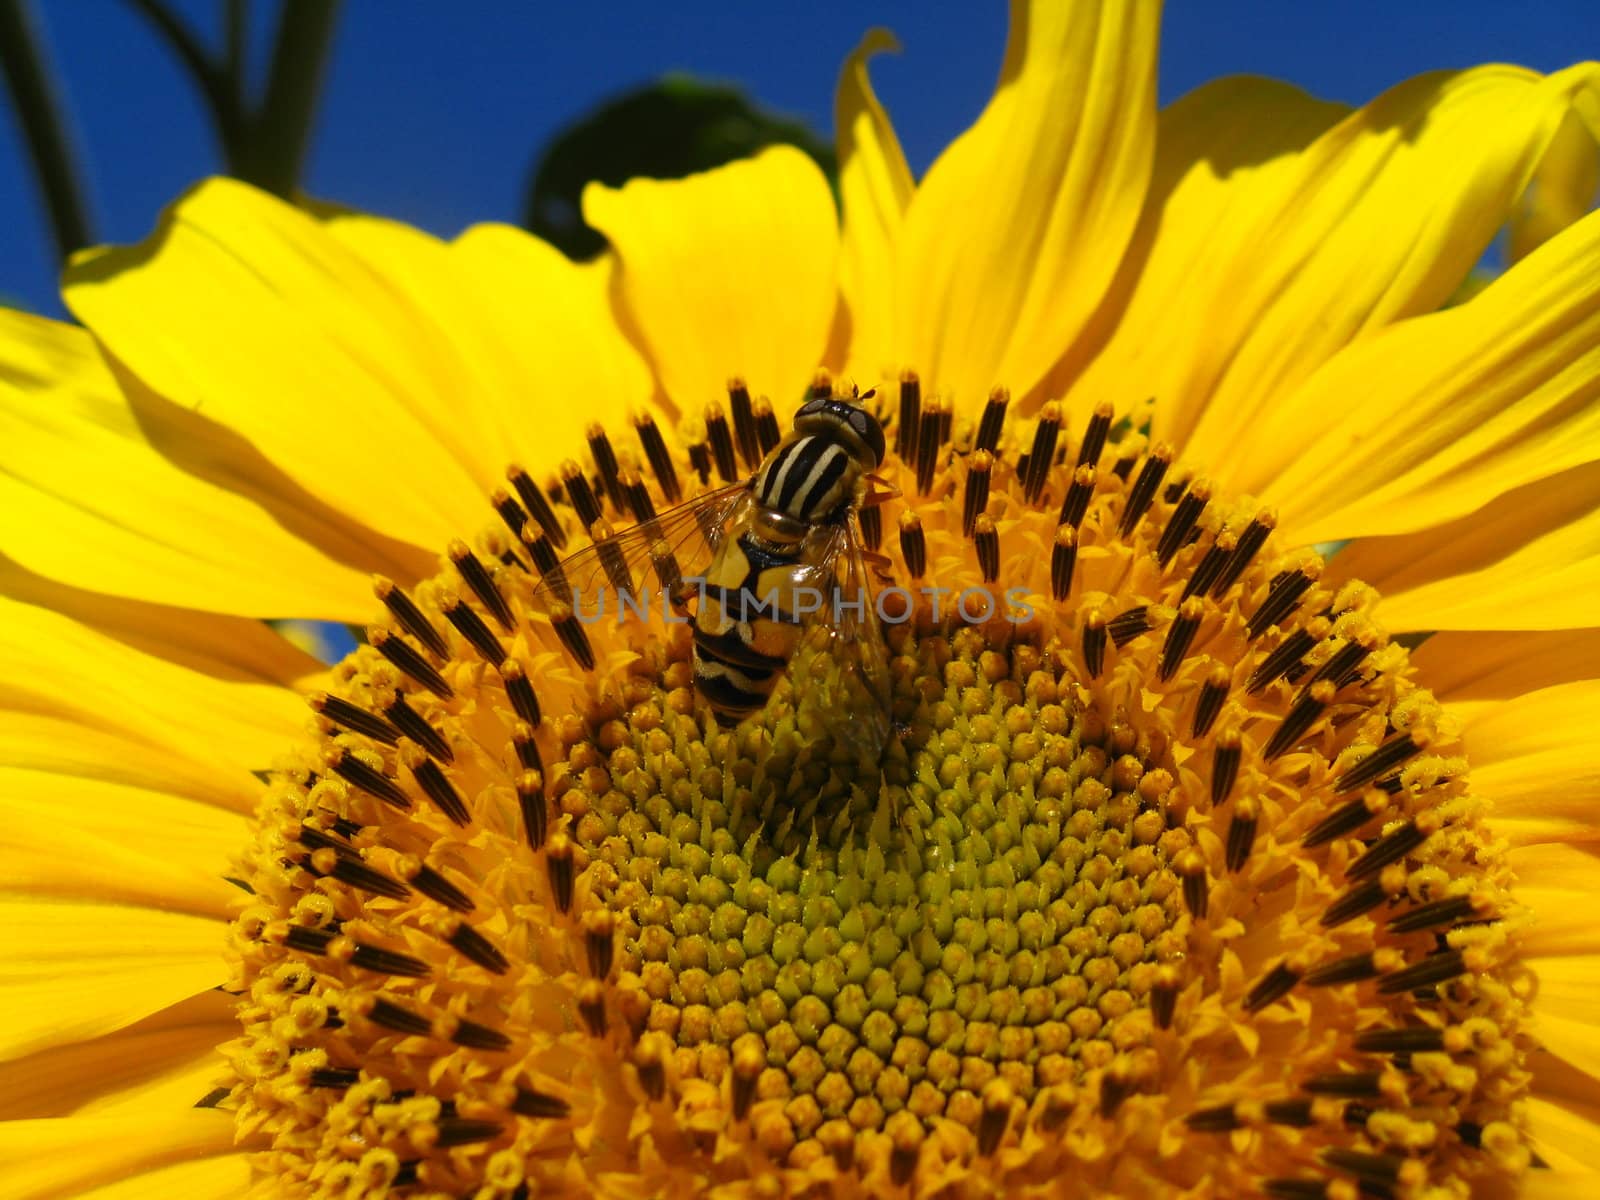 The yellow fly on a yellow sunflower on the sky background